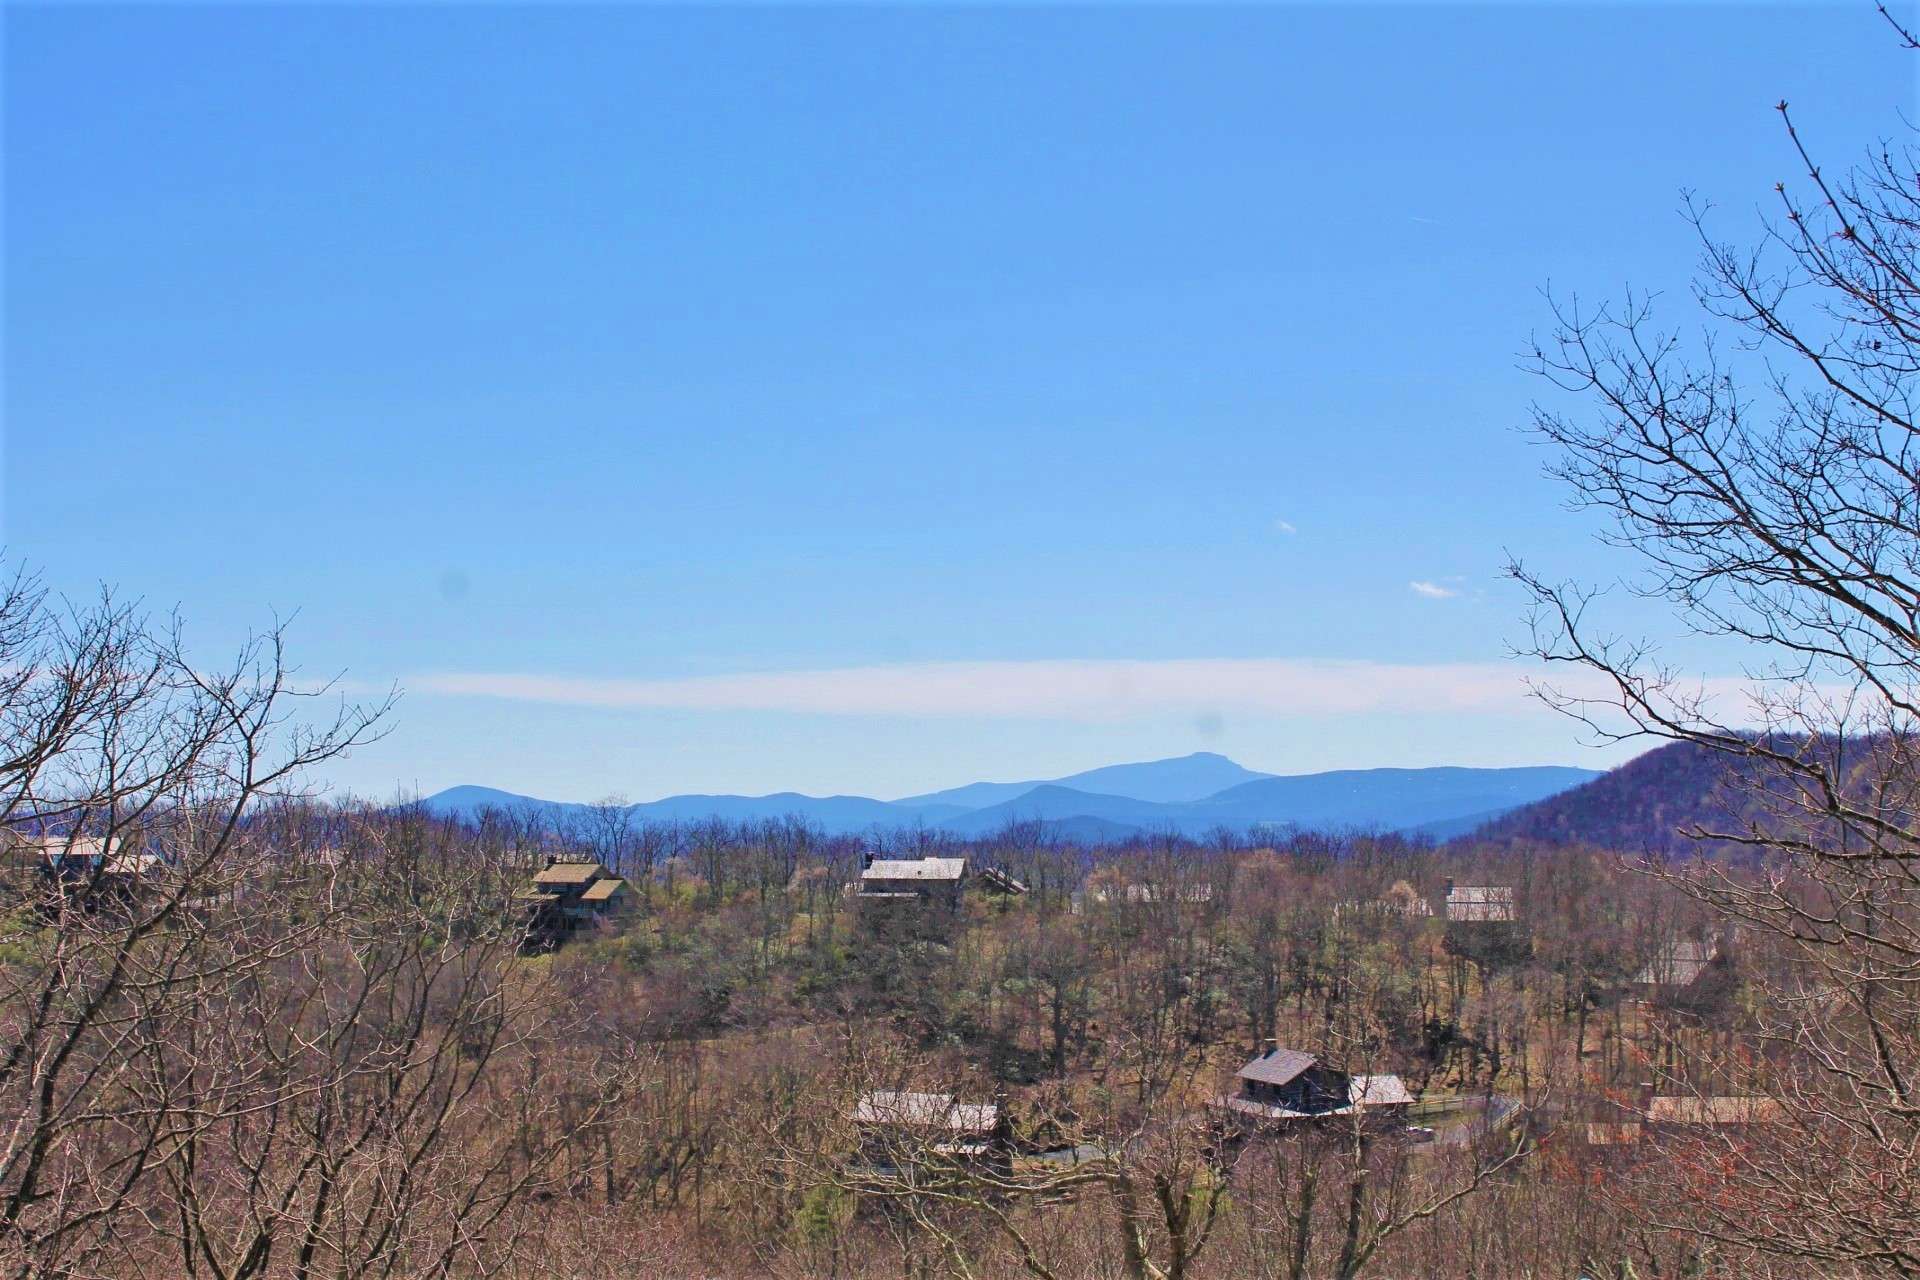 Watch the seasons unfold with Grandfather Mountain in the not too far distance.